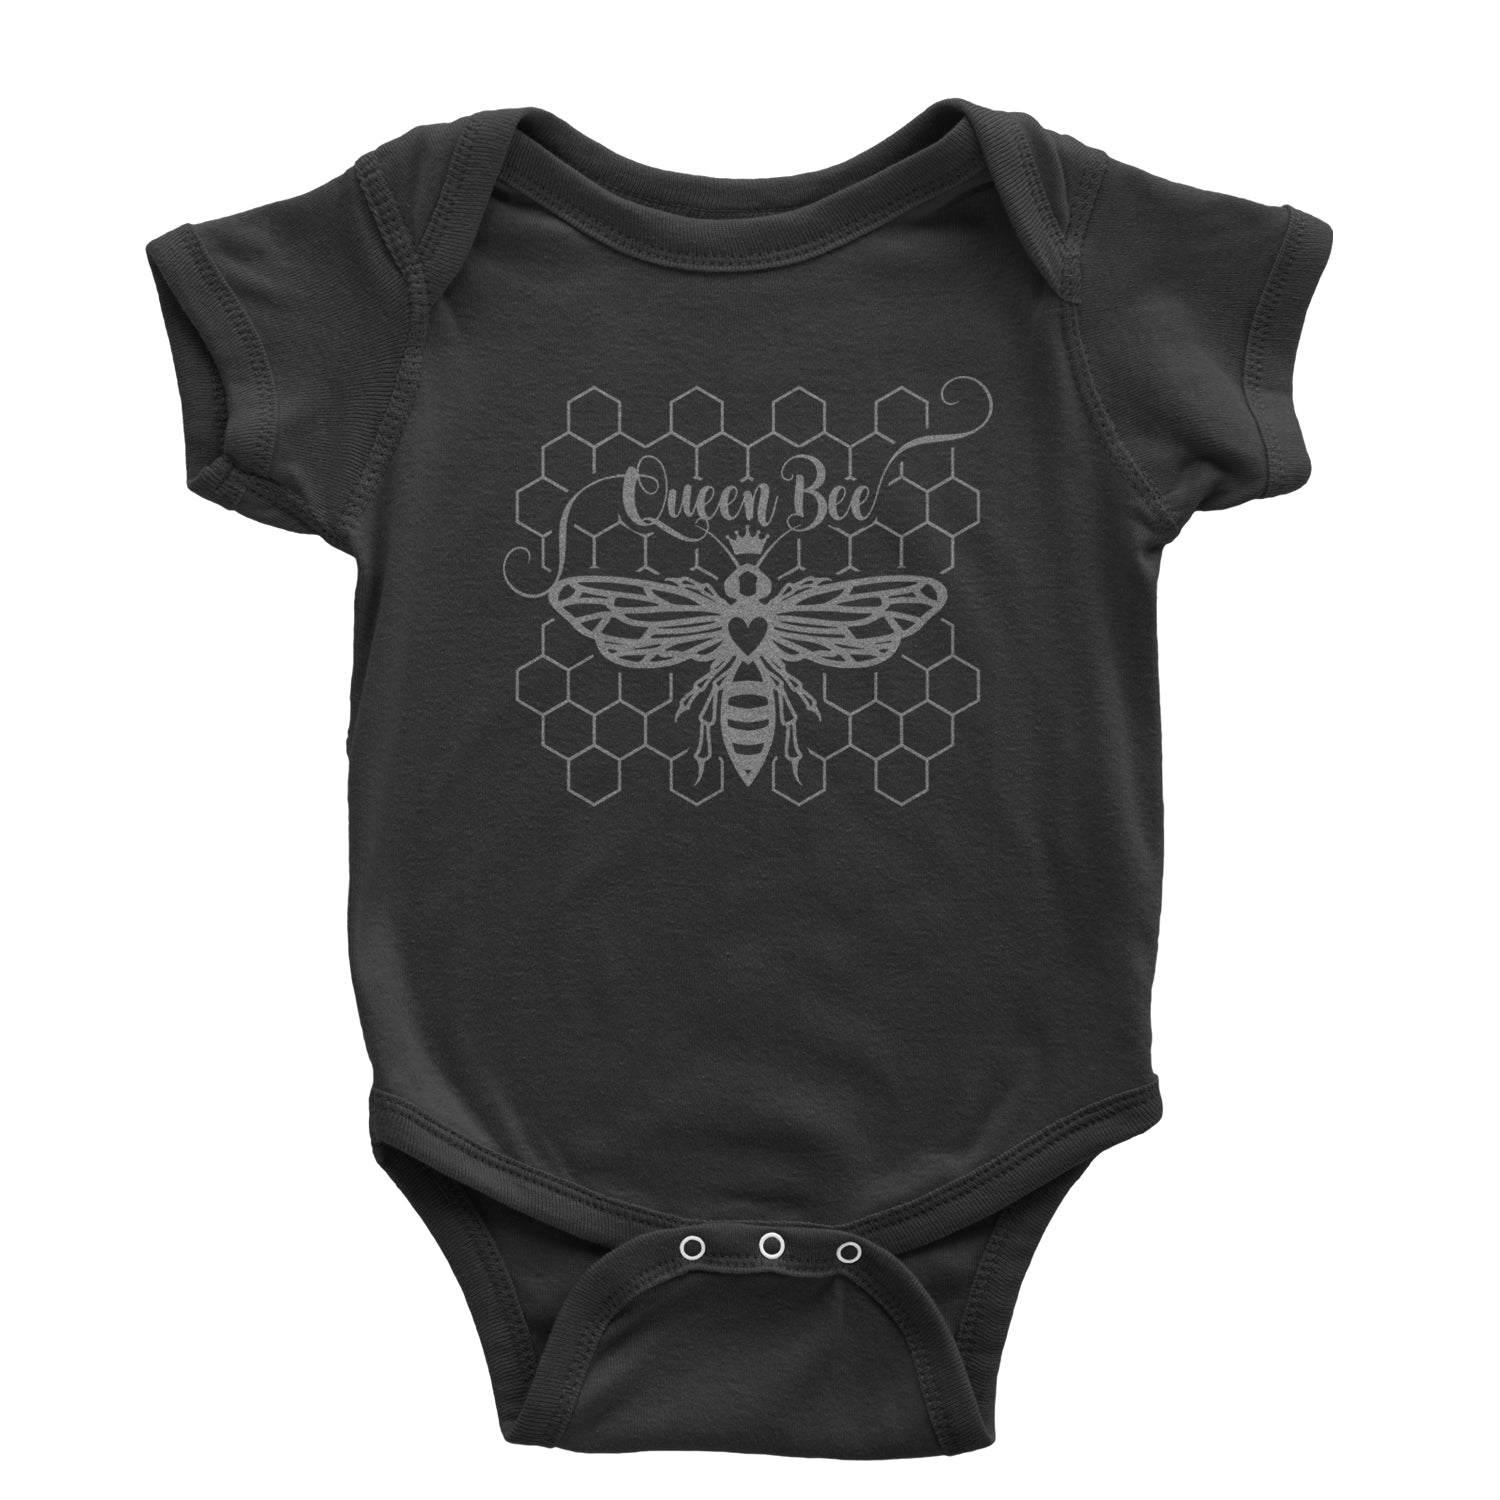 Beehive Queen Bee Metallic Silver Witty Bee Hive Design Infant One-Piece Romper Bodysuit and Toddler T-shirt